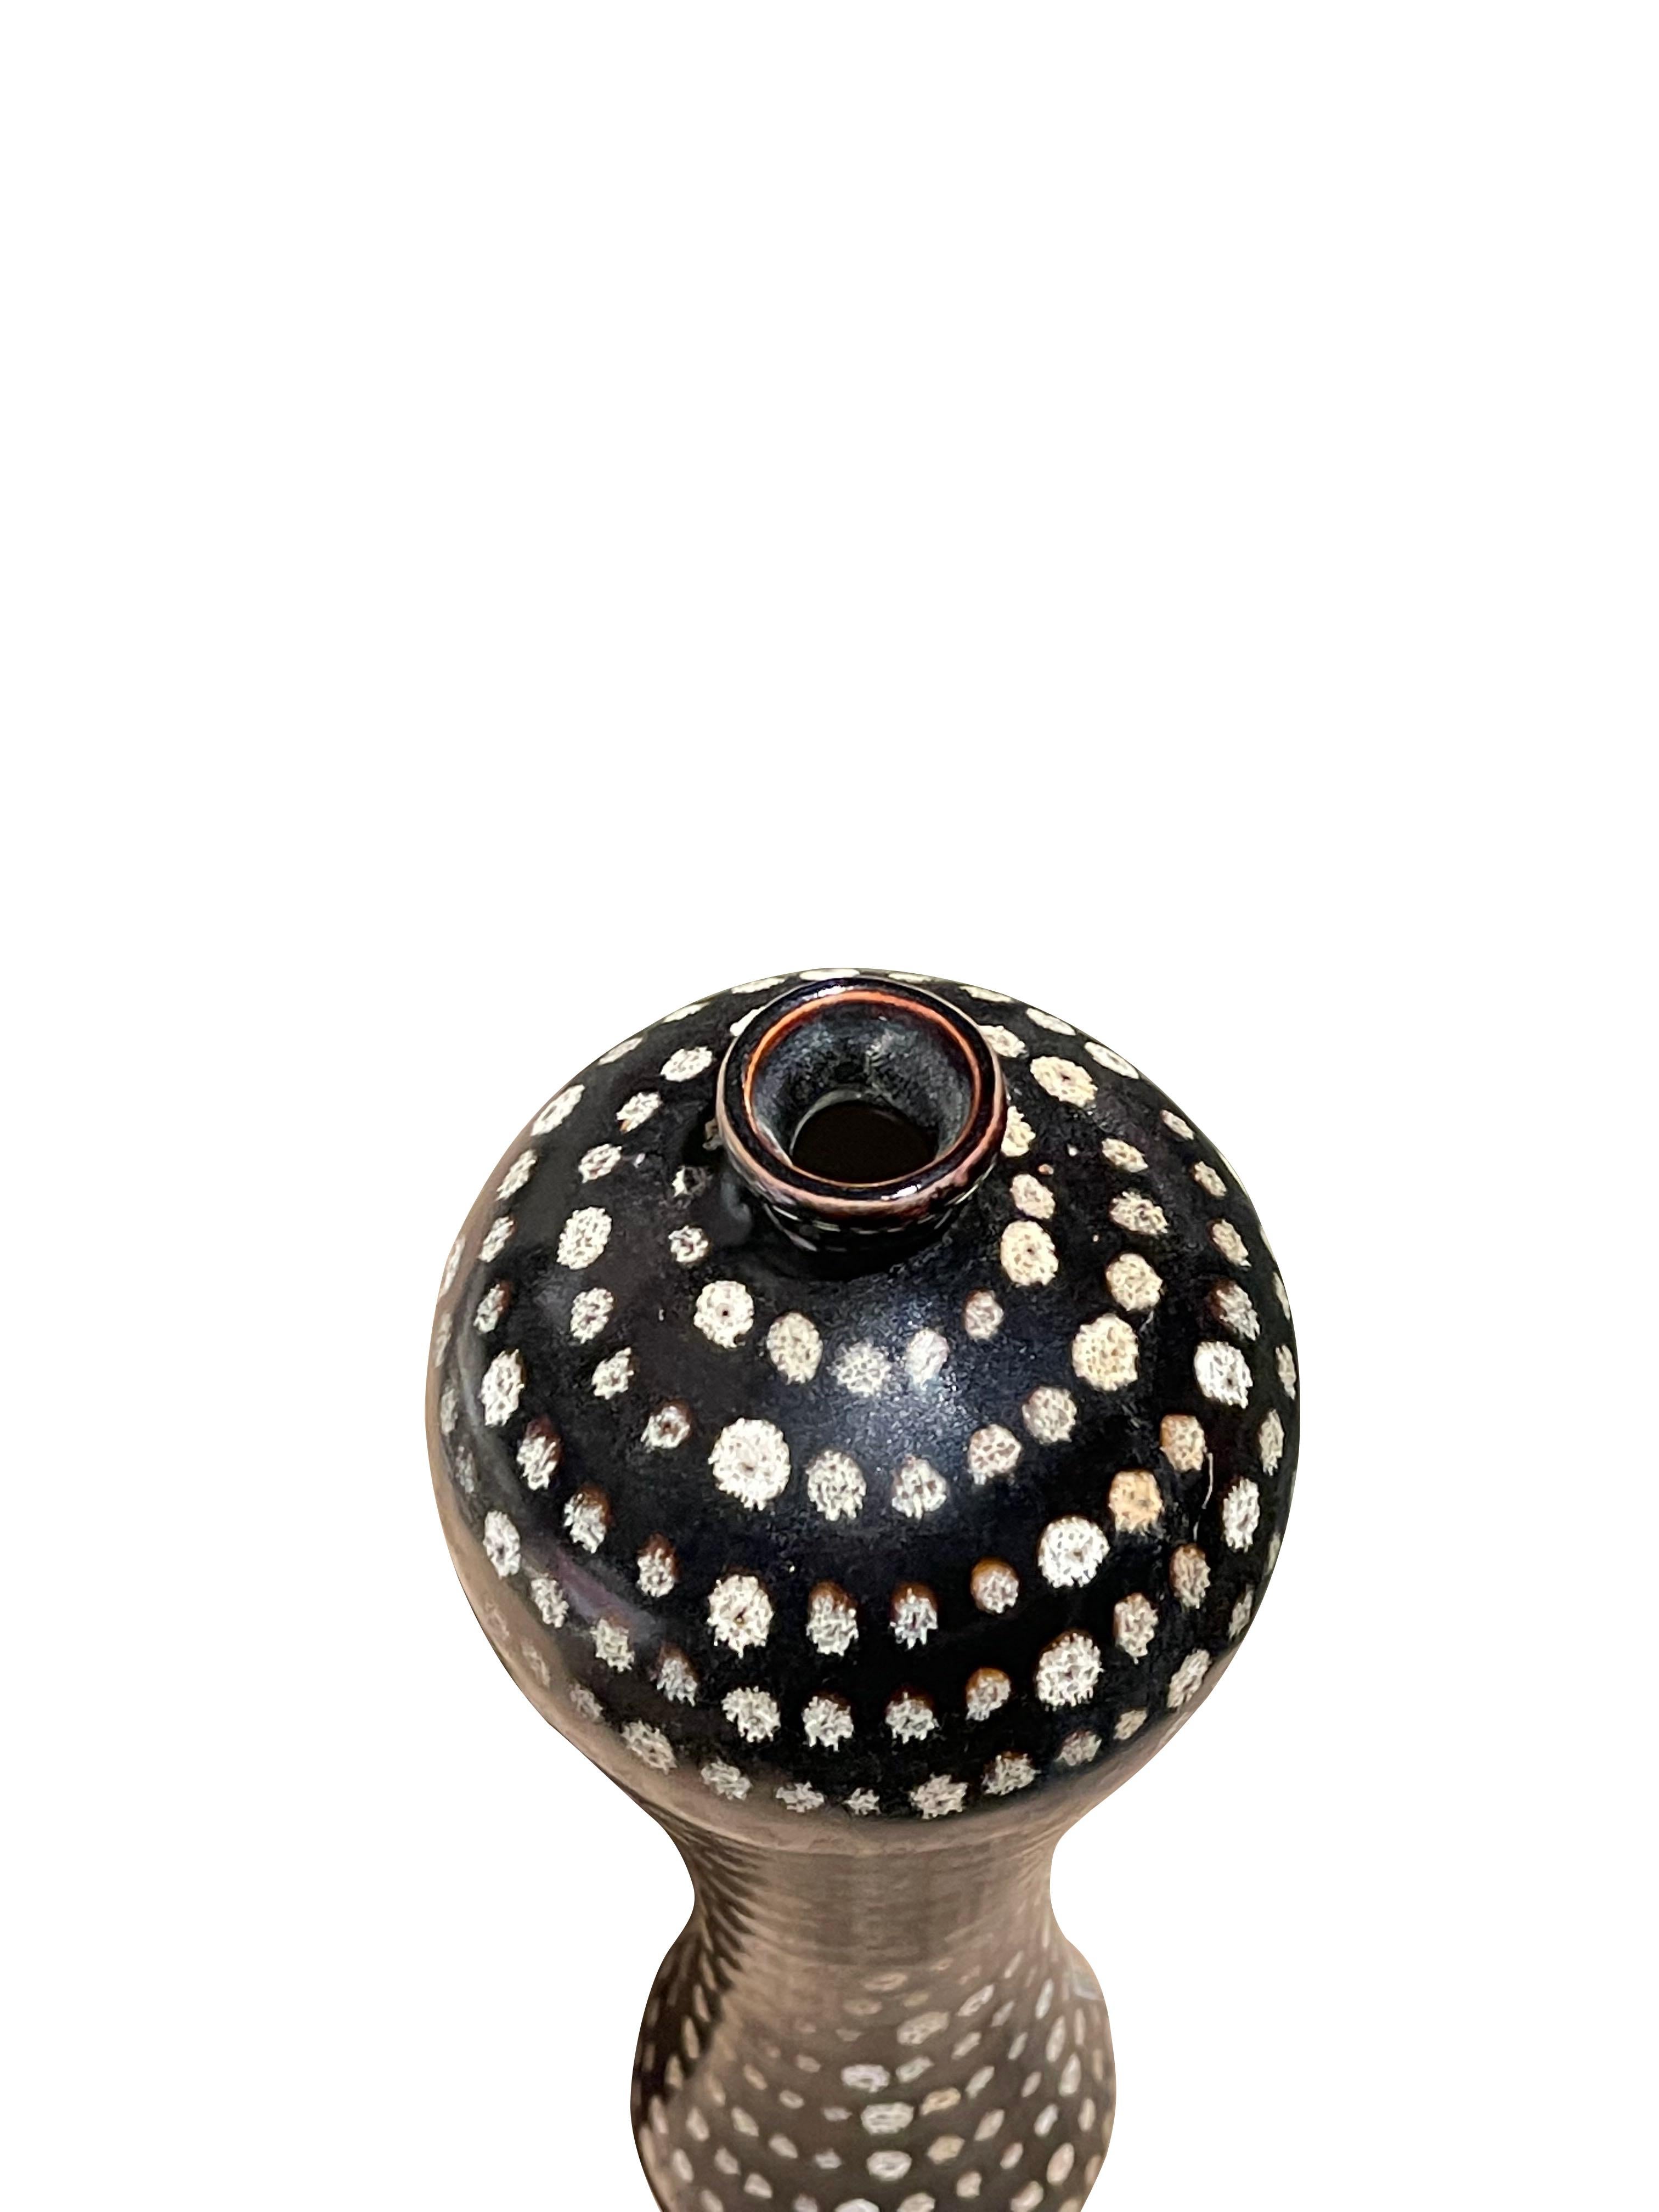 Contemporary Chinese black ground tall, slender, vase with hand painted small white dots.
ARRIVING TBD.